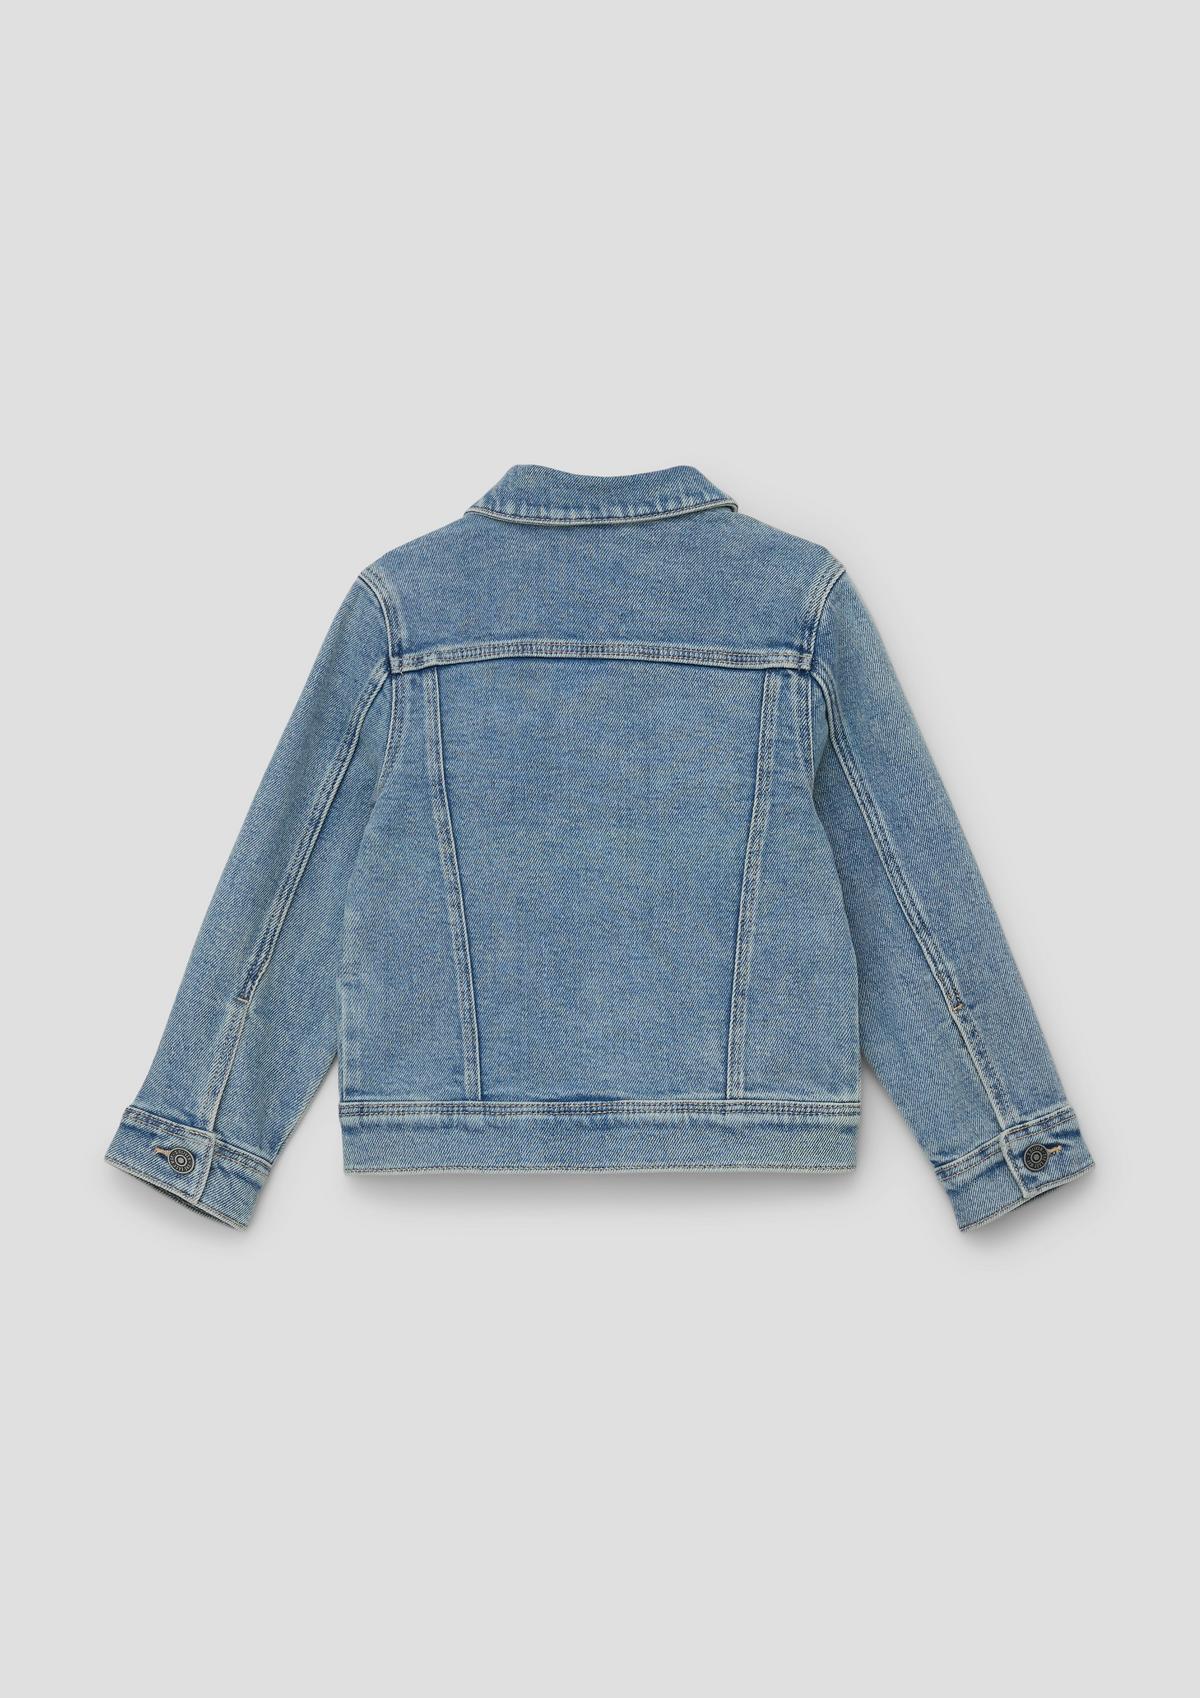 s.Oliver Denim jacket in a semi-fitted design